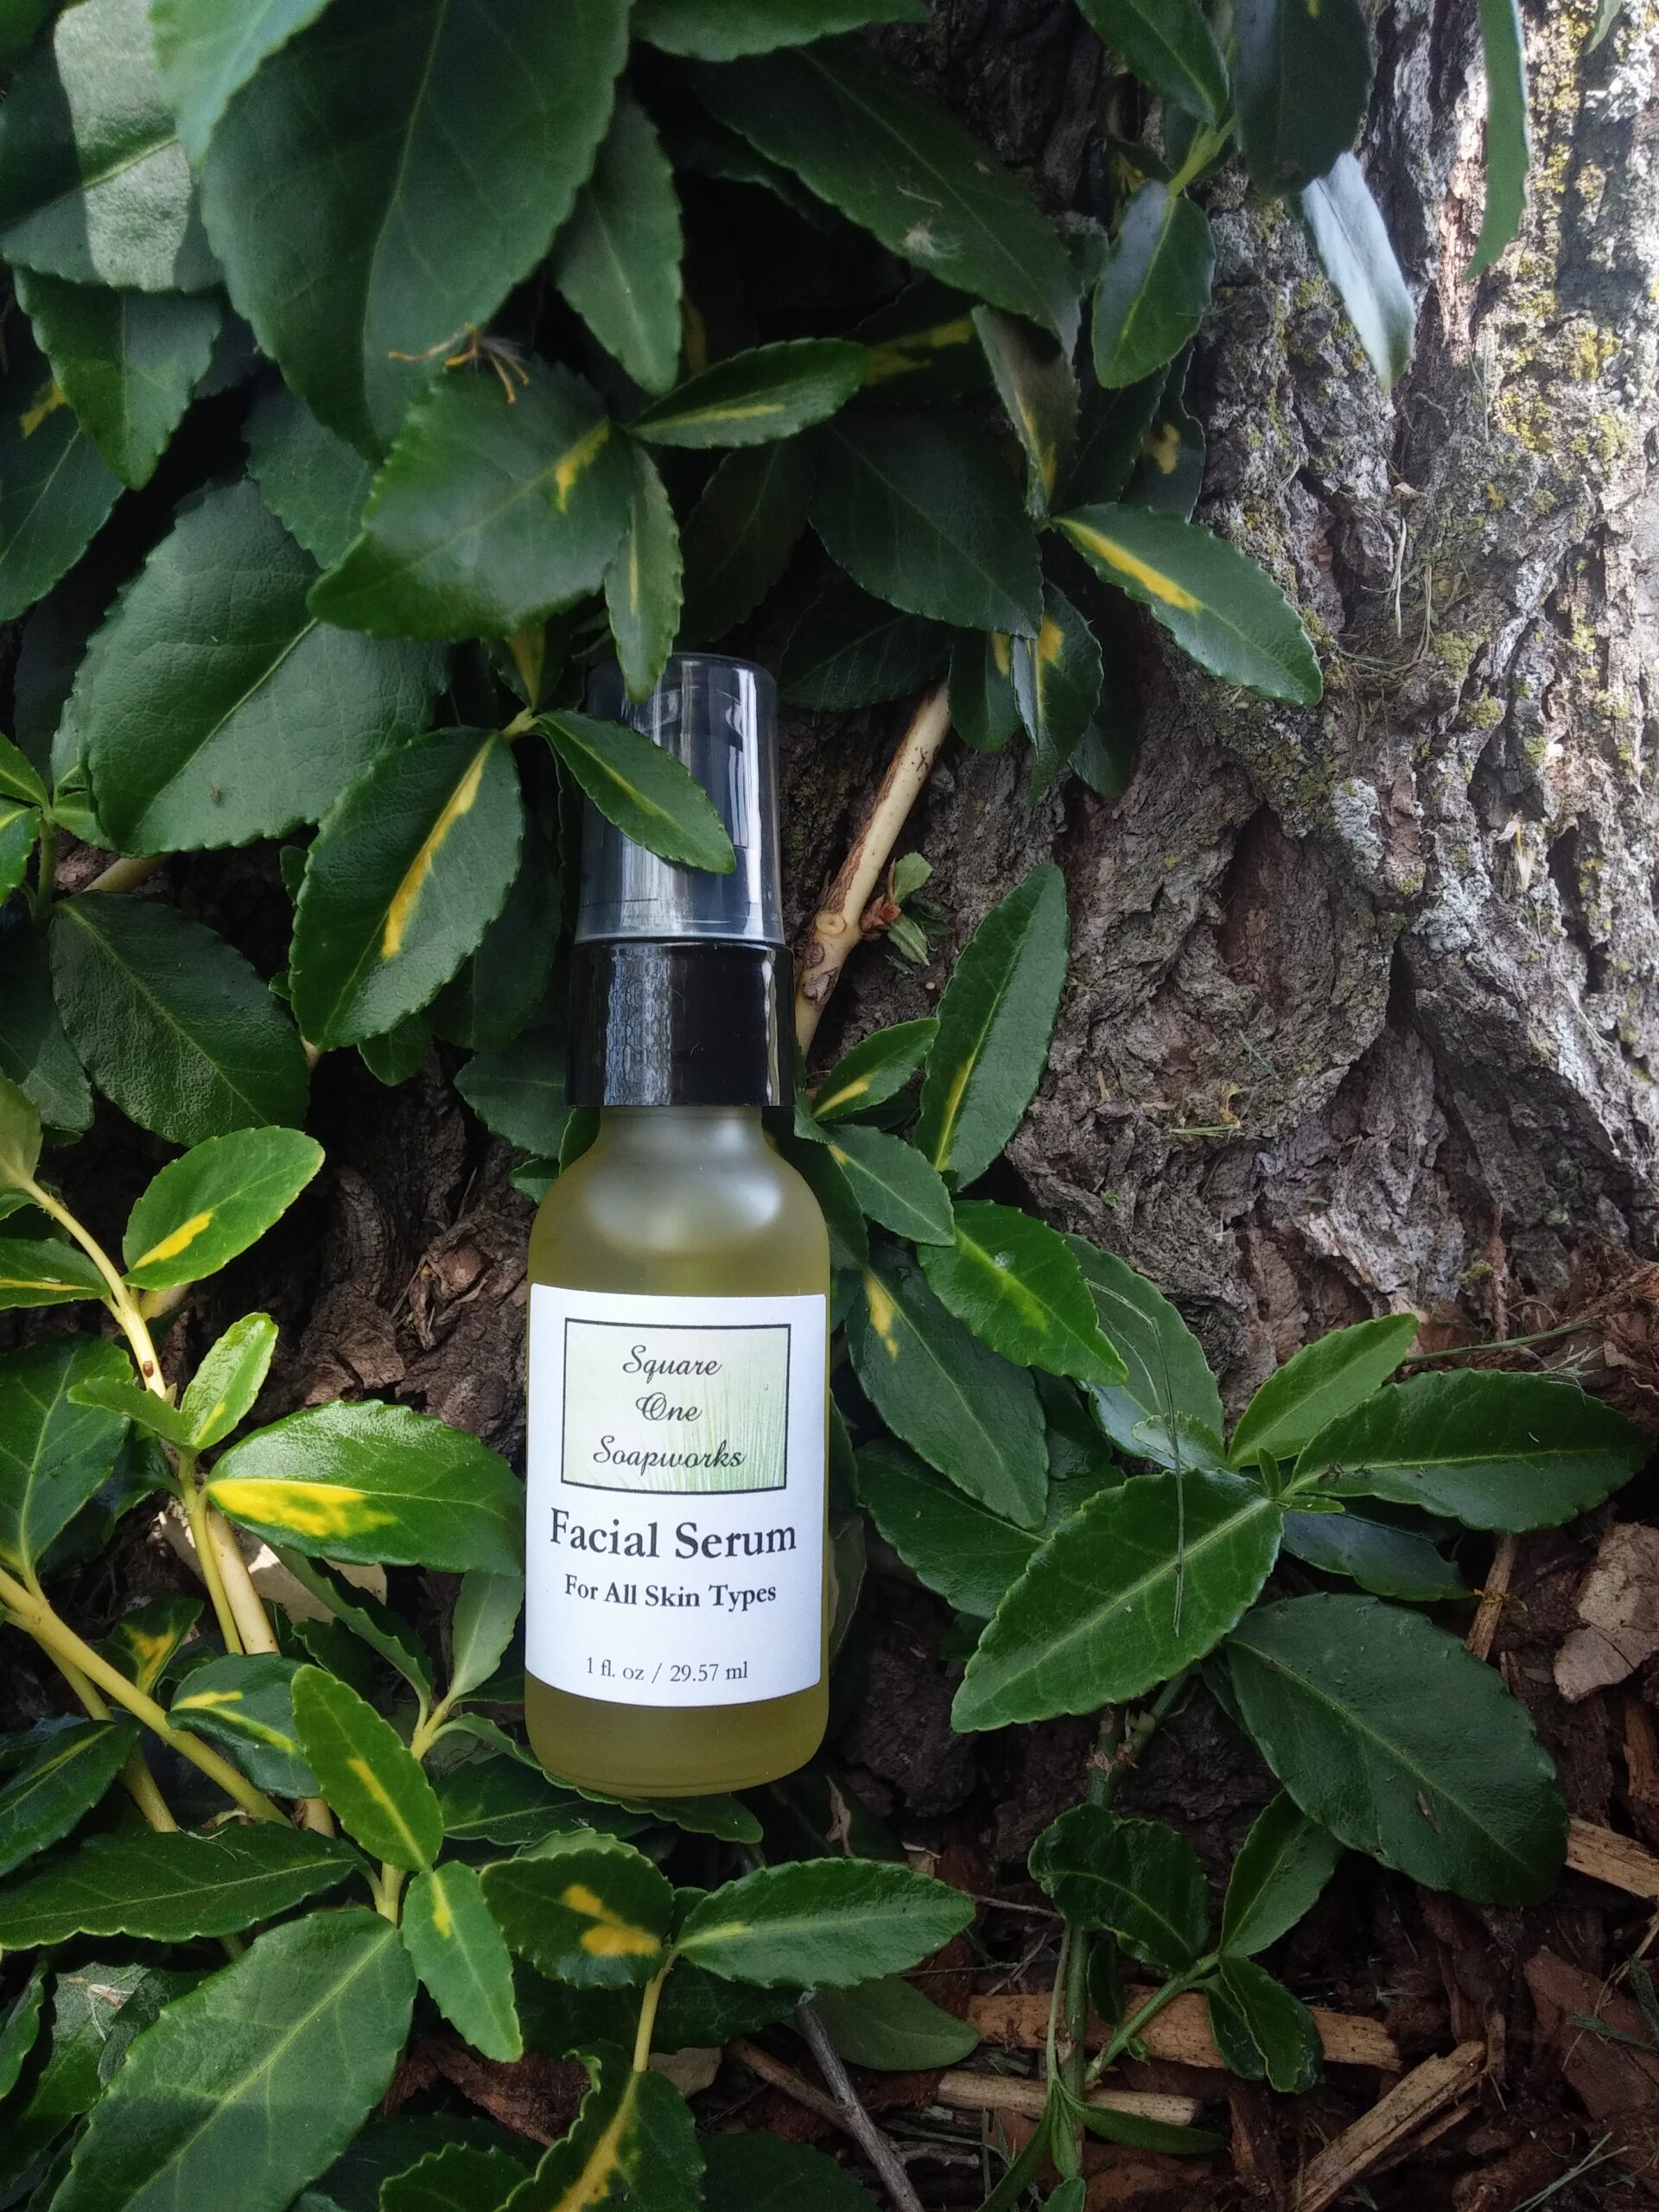 Facial Serum for All Skin Types - Square One Soapworks